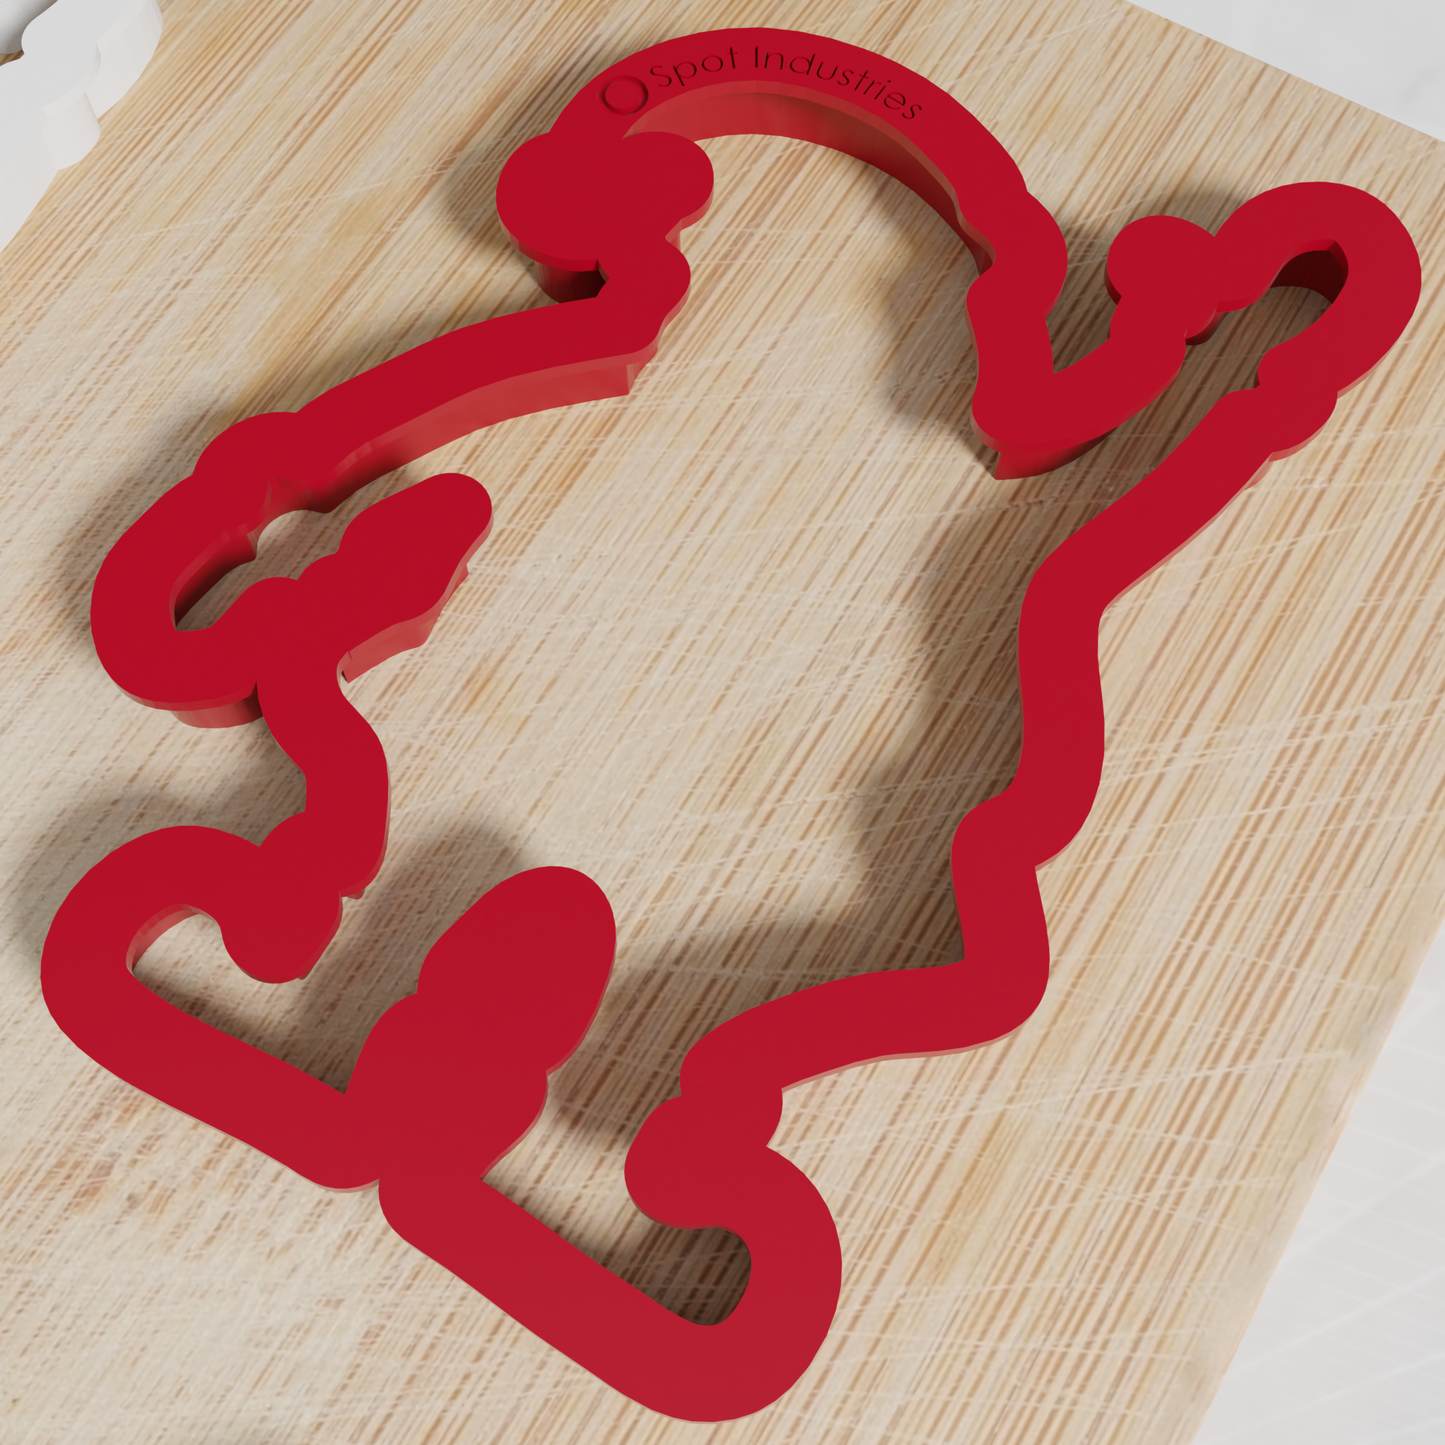 Easy Hold Santa Cookie Cutter Set For Kids & Adults! Custom Sizes, Multiple Colors. Work As Clay Cutter And Fondant Cutter Too!